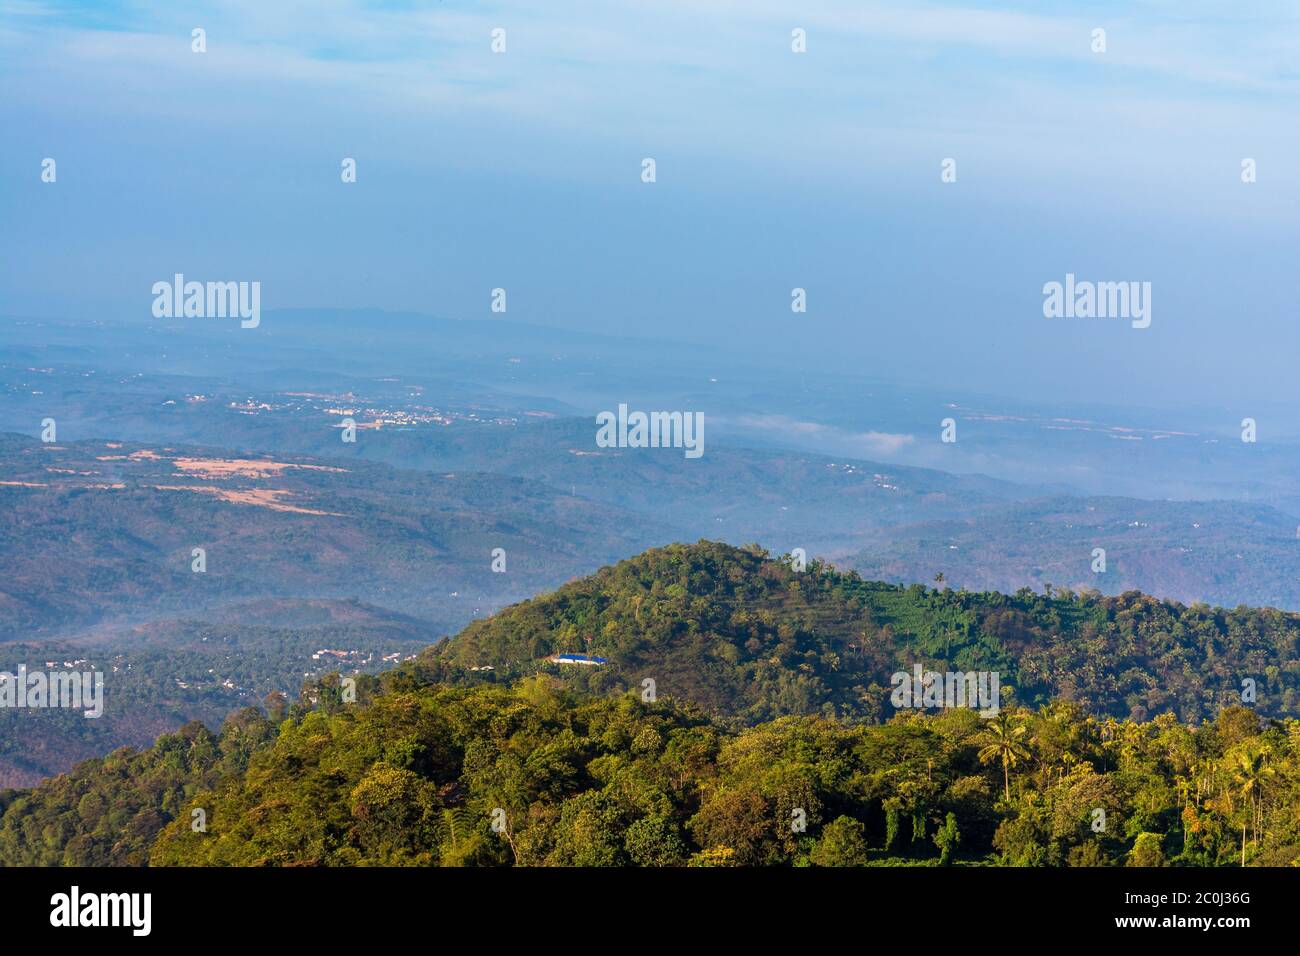 Mountain scenery of Kannur Kerala, beautiful nature scenery of God's own country Stock Photo